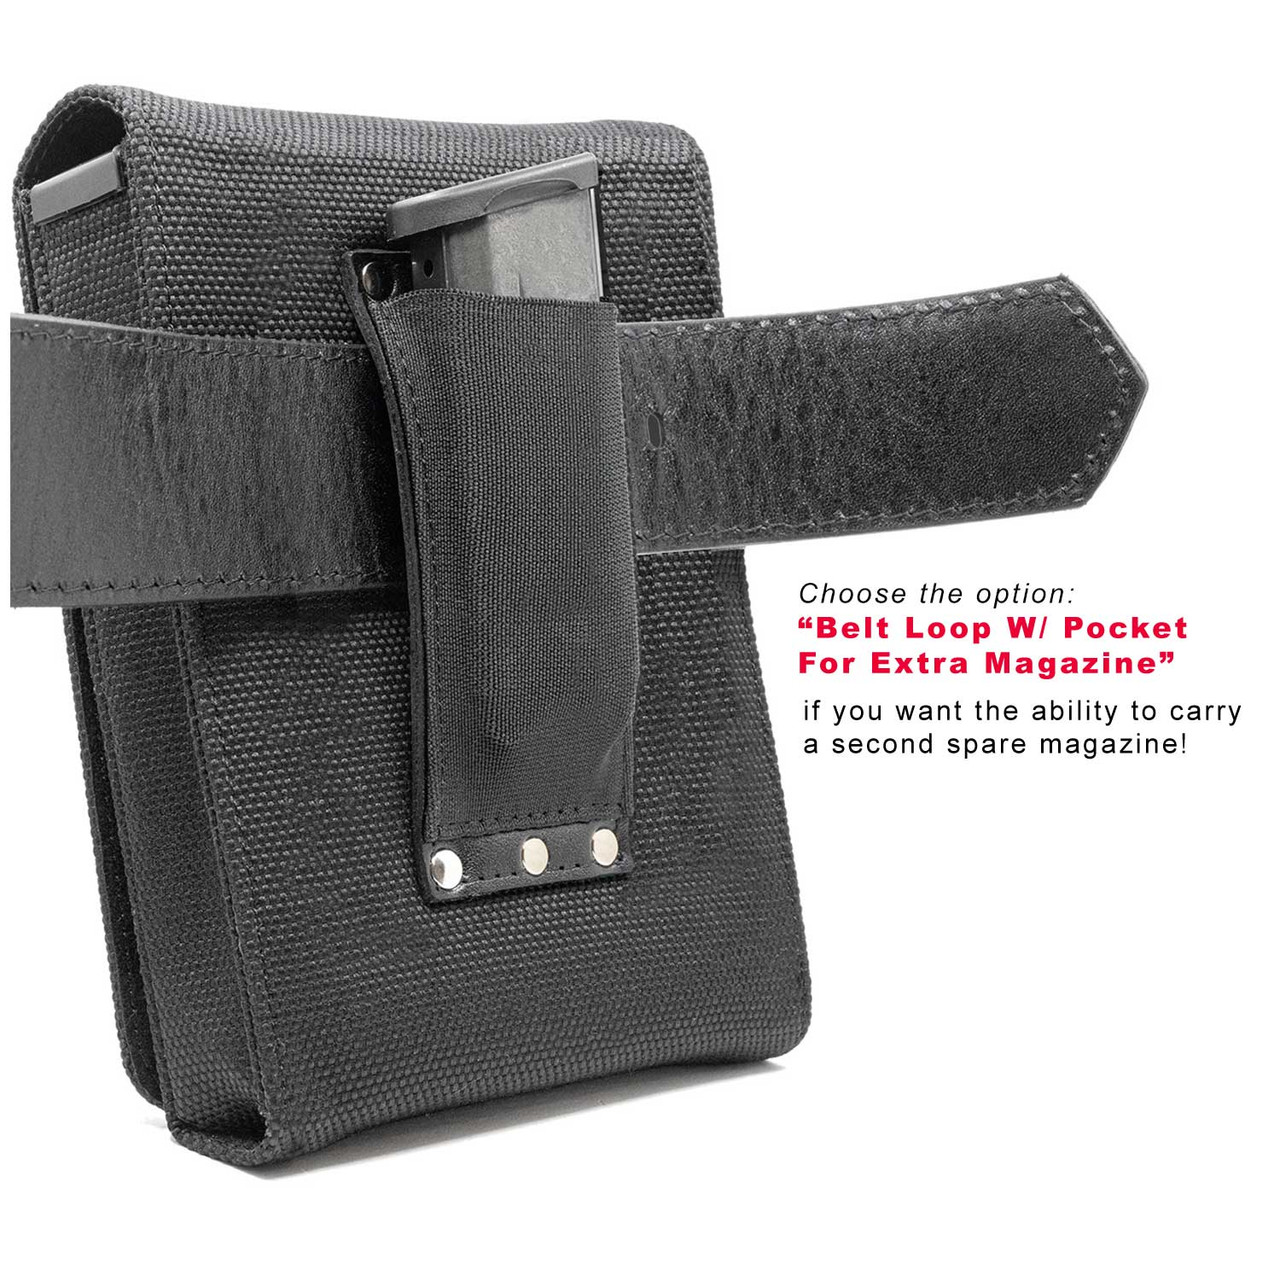 The Keltec P11 Xtra Mag Black Leather Holster